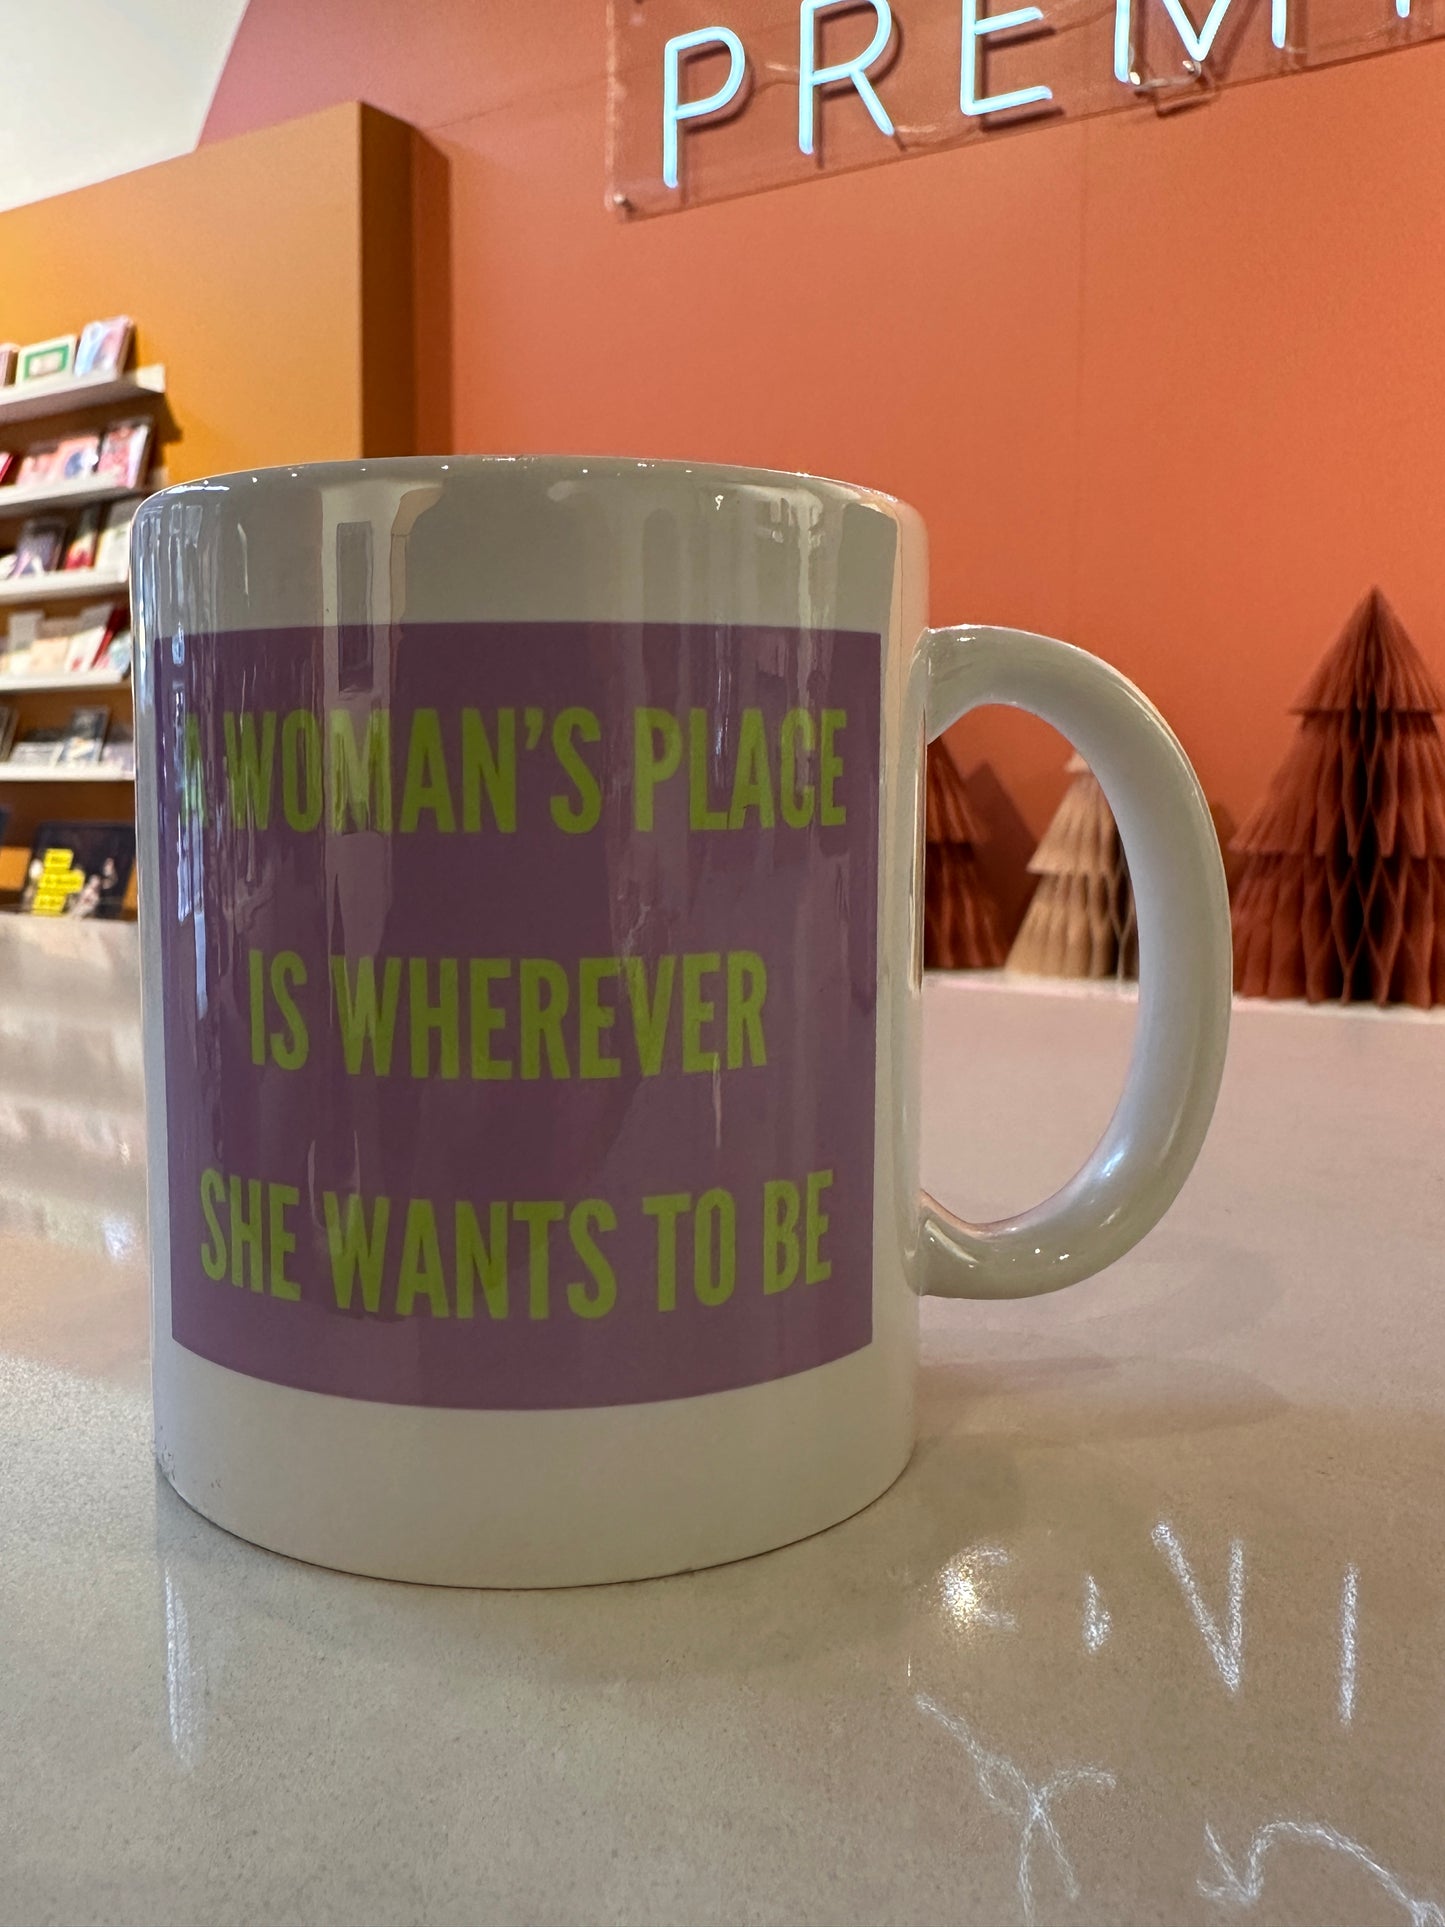 Madame Premier A Woman’s Place Is Wherever She Wants To Be Mug